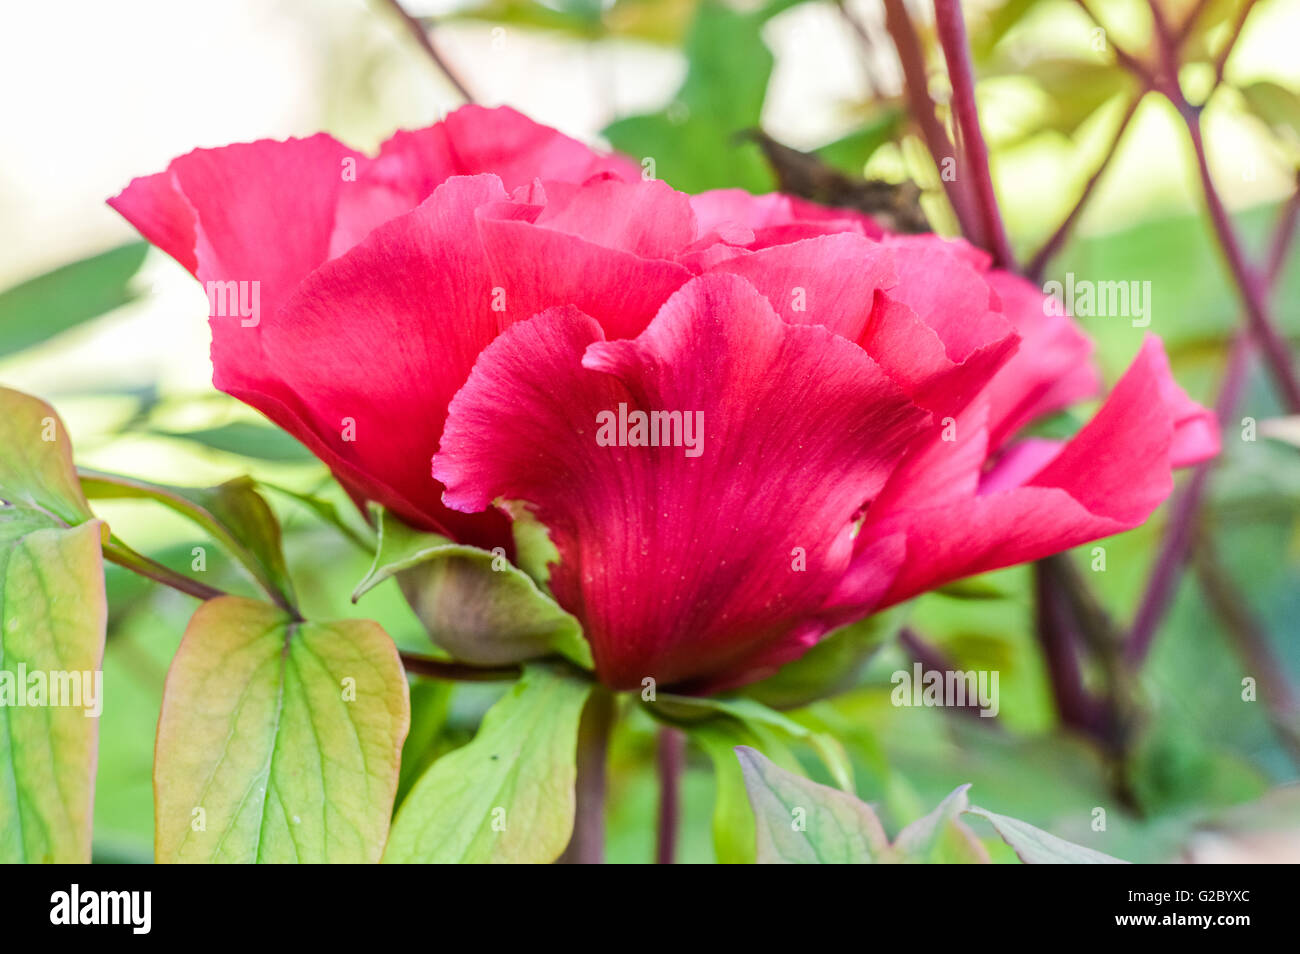 close up of a bright pink red giant peony flowerhead Stock Photo